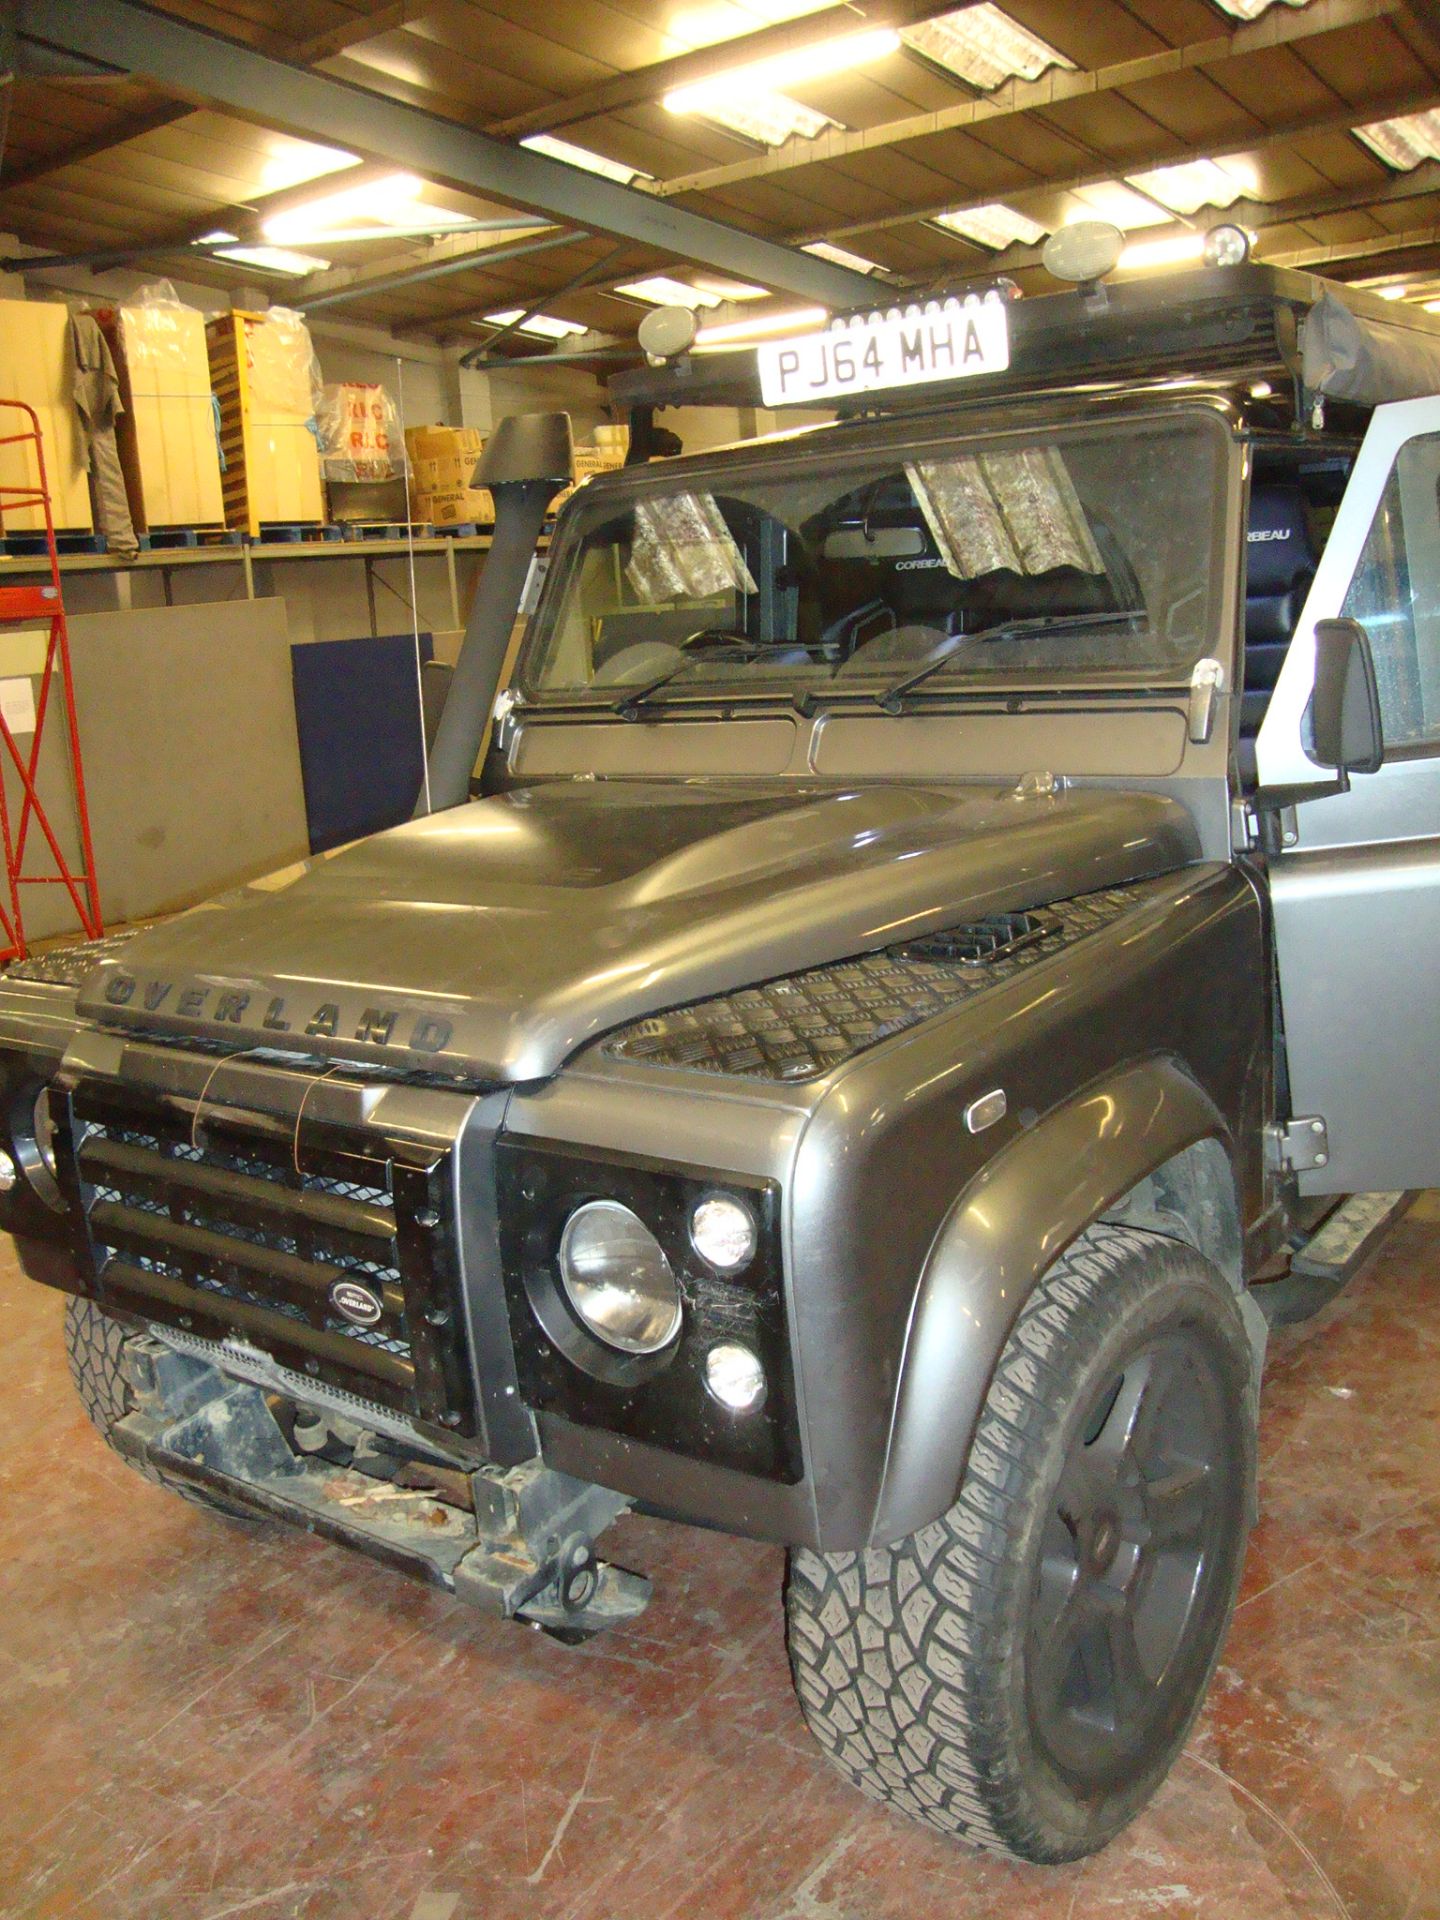 2014 Land Rover Defender 110 XS 2.2 TDCi Utility Wagon SMC Over Land Flat Dog Special - Image 8 of 37